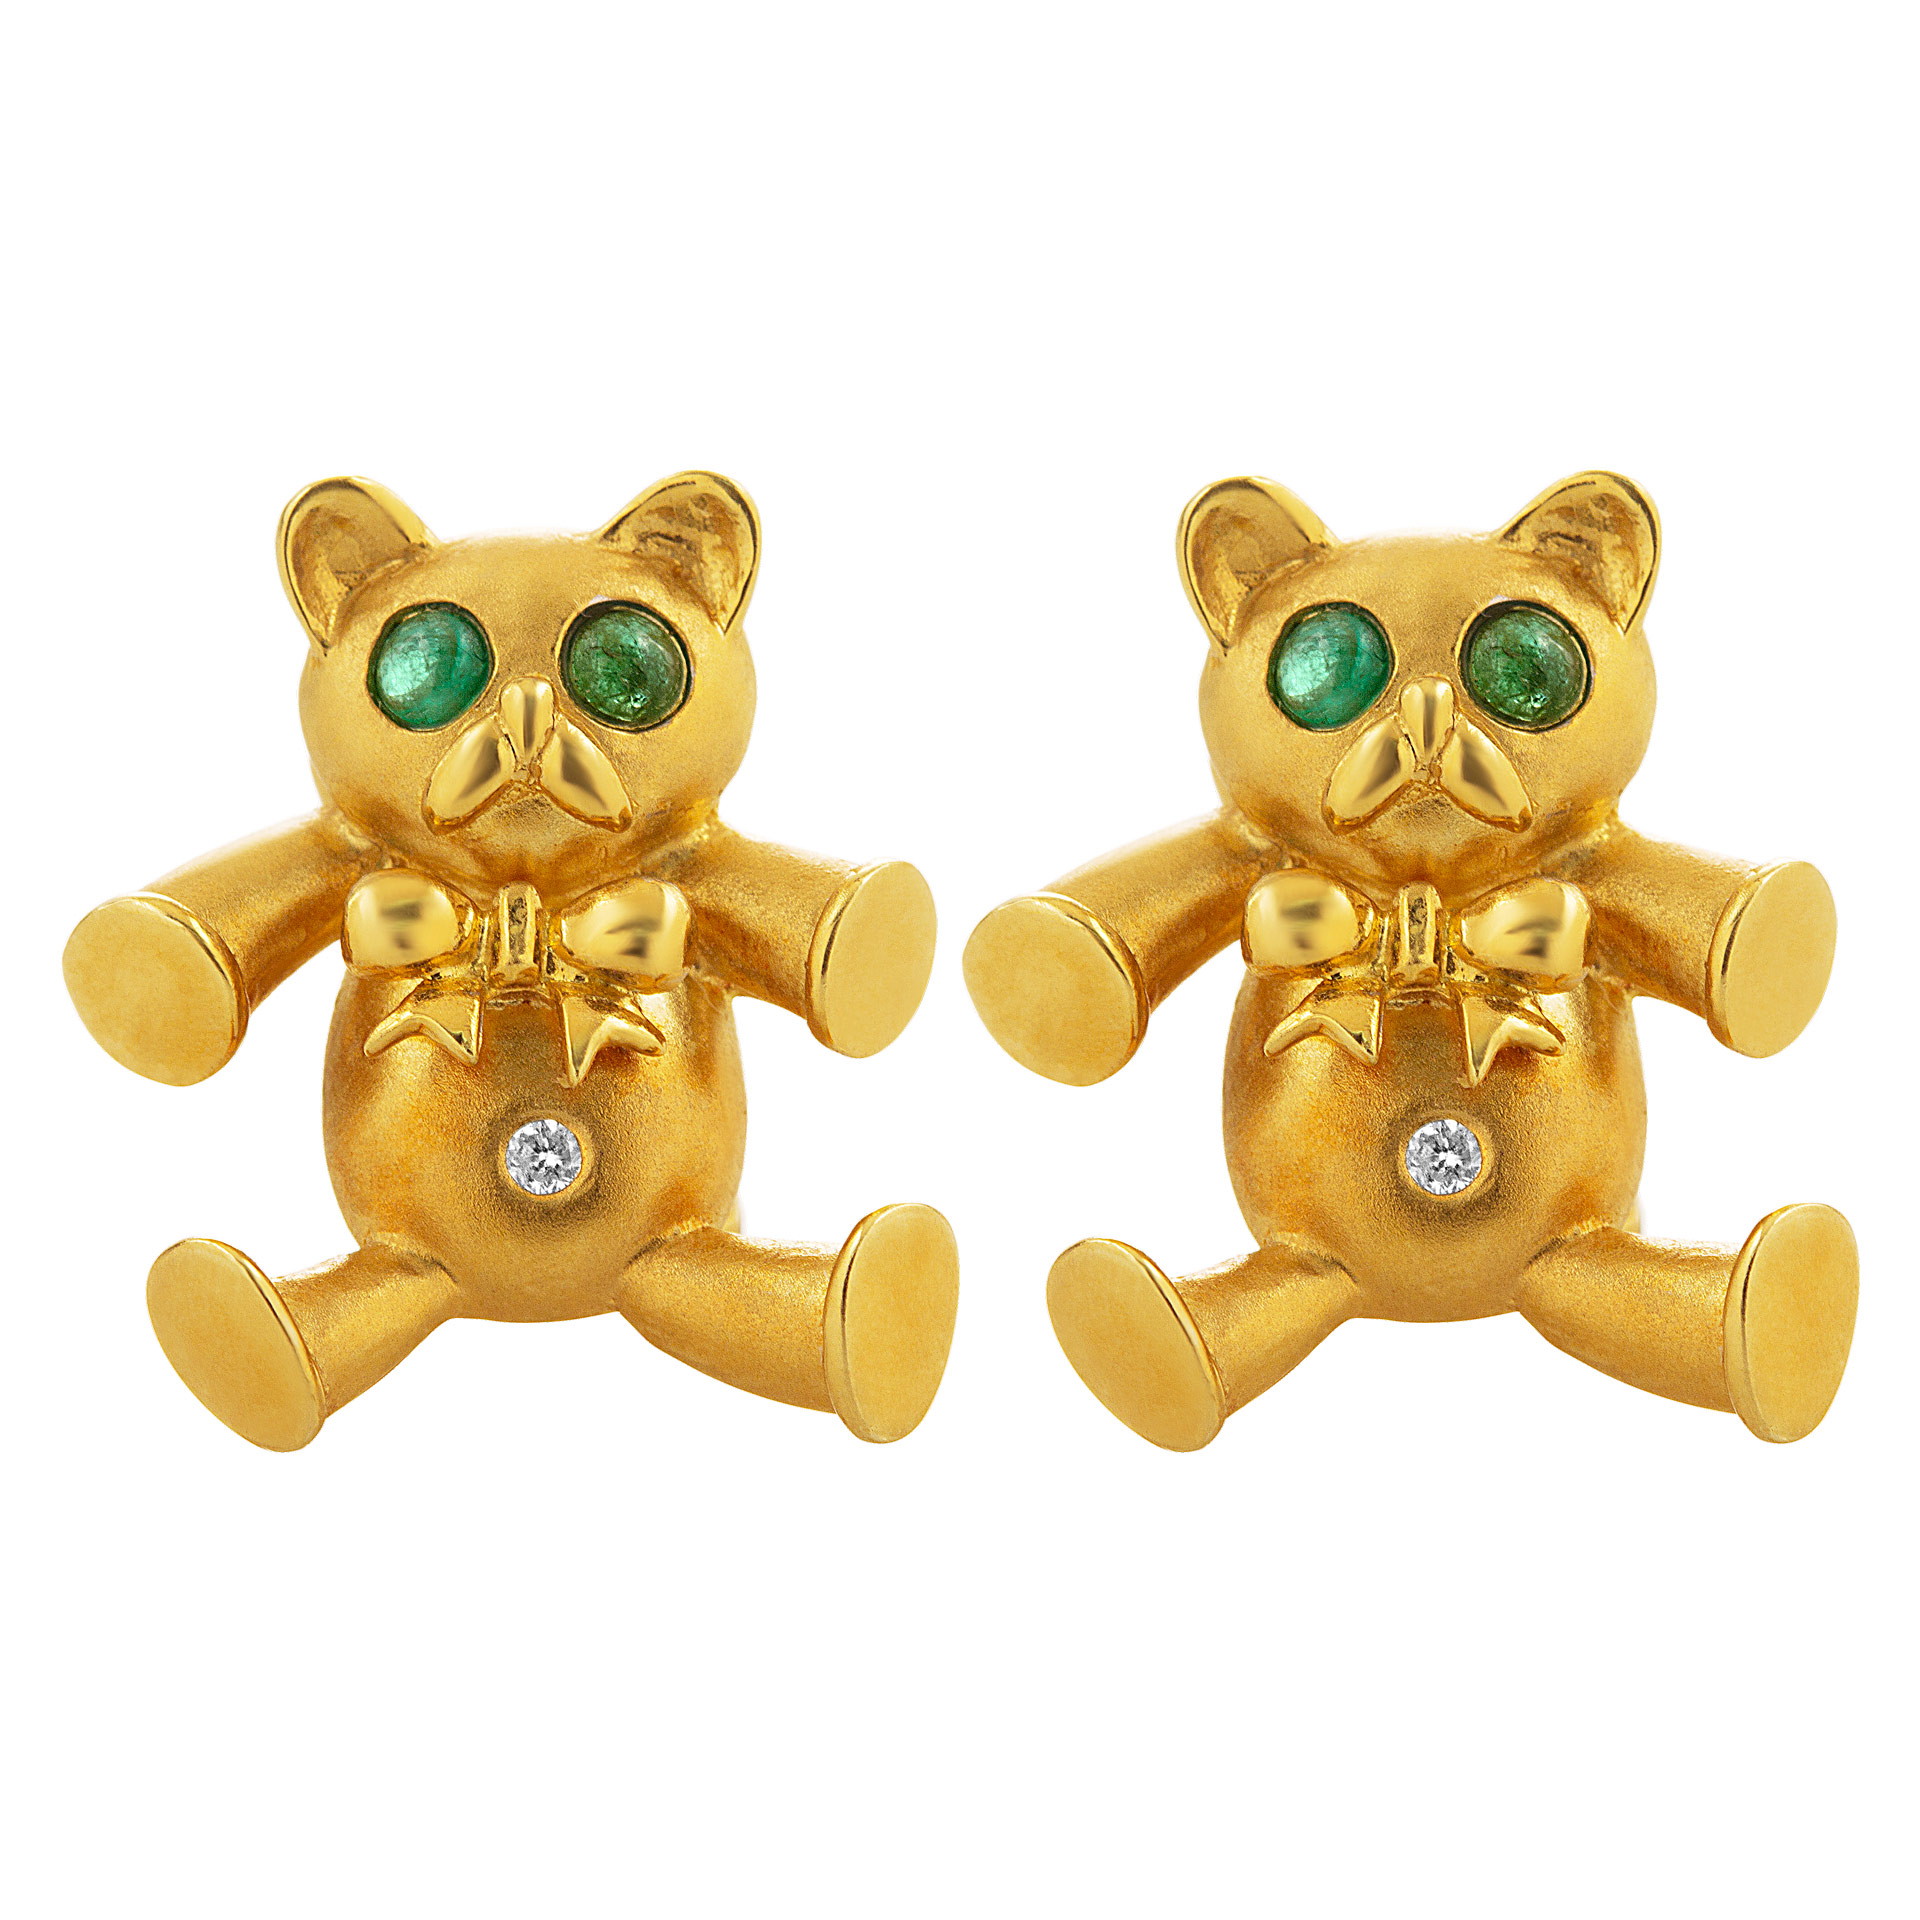 Bear earclips in 18k yellow gold with emerald eyes & diamond belly button